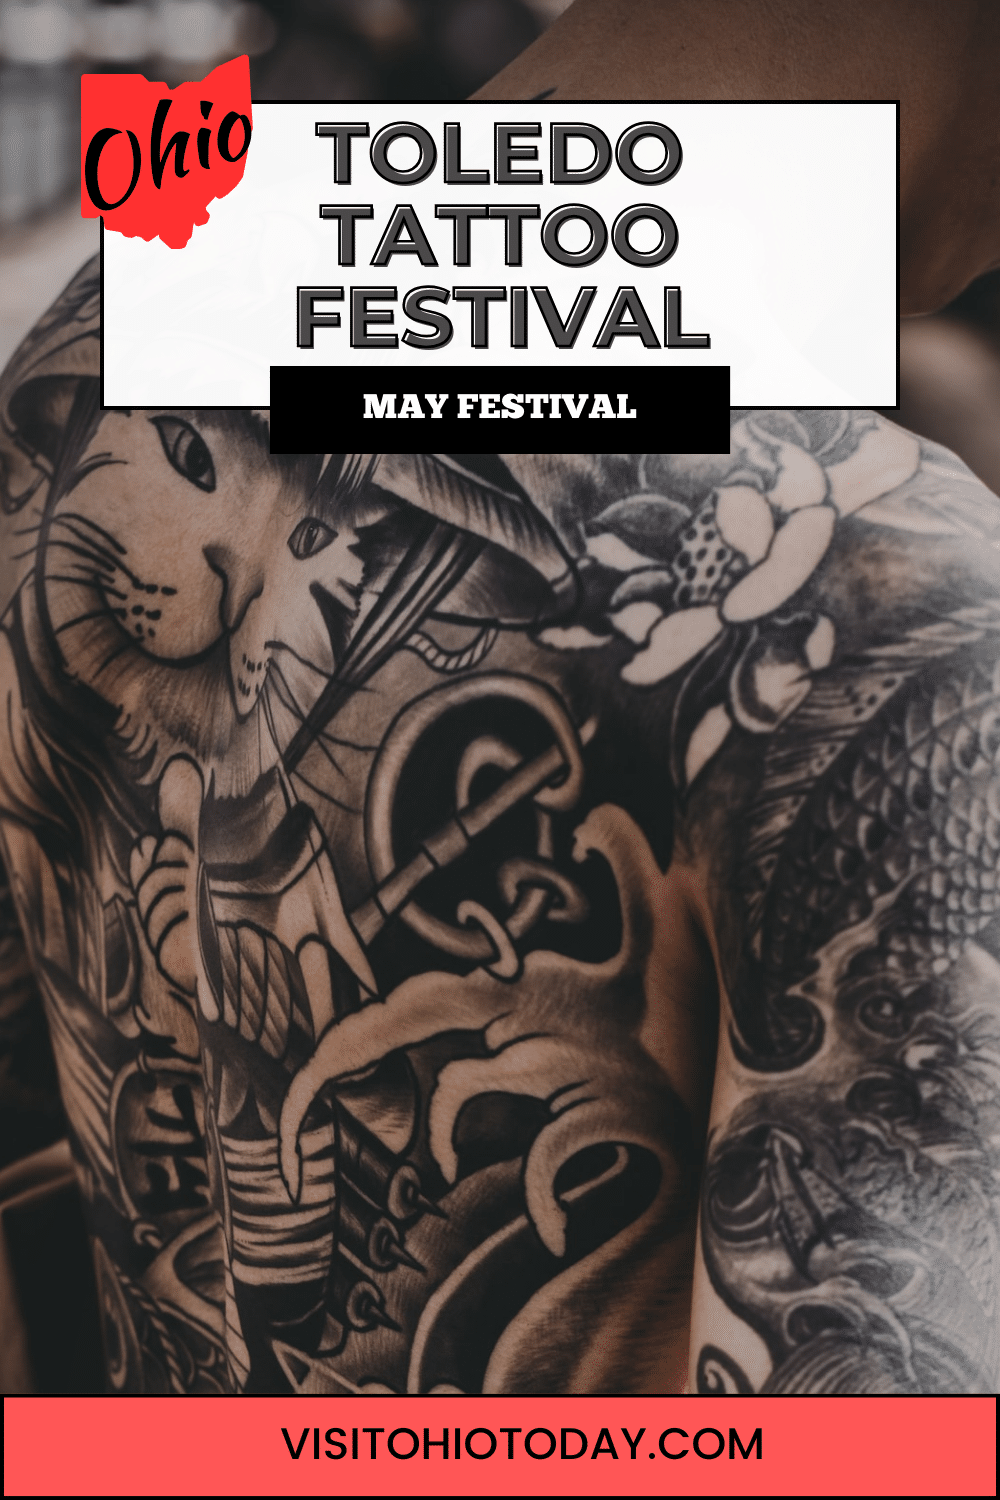 The Toledo Tattoo Festival brings together some of the best tattoo artists from Ohio and neighboring states. The event is in early May at Glass City Center.